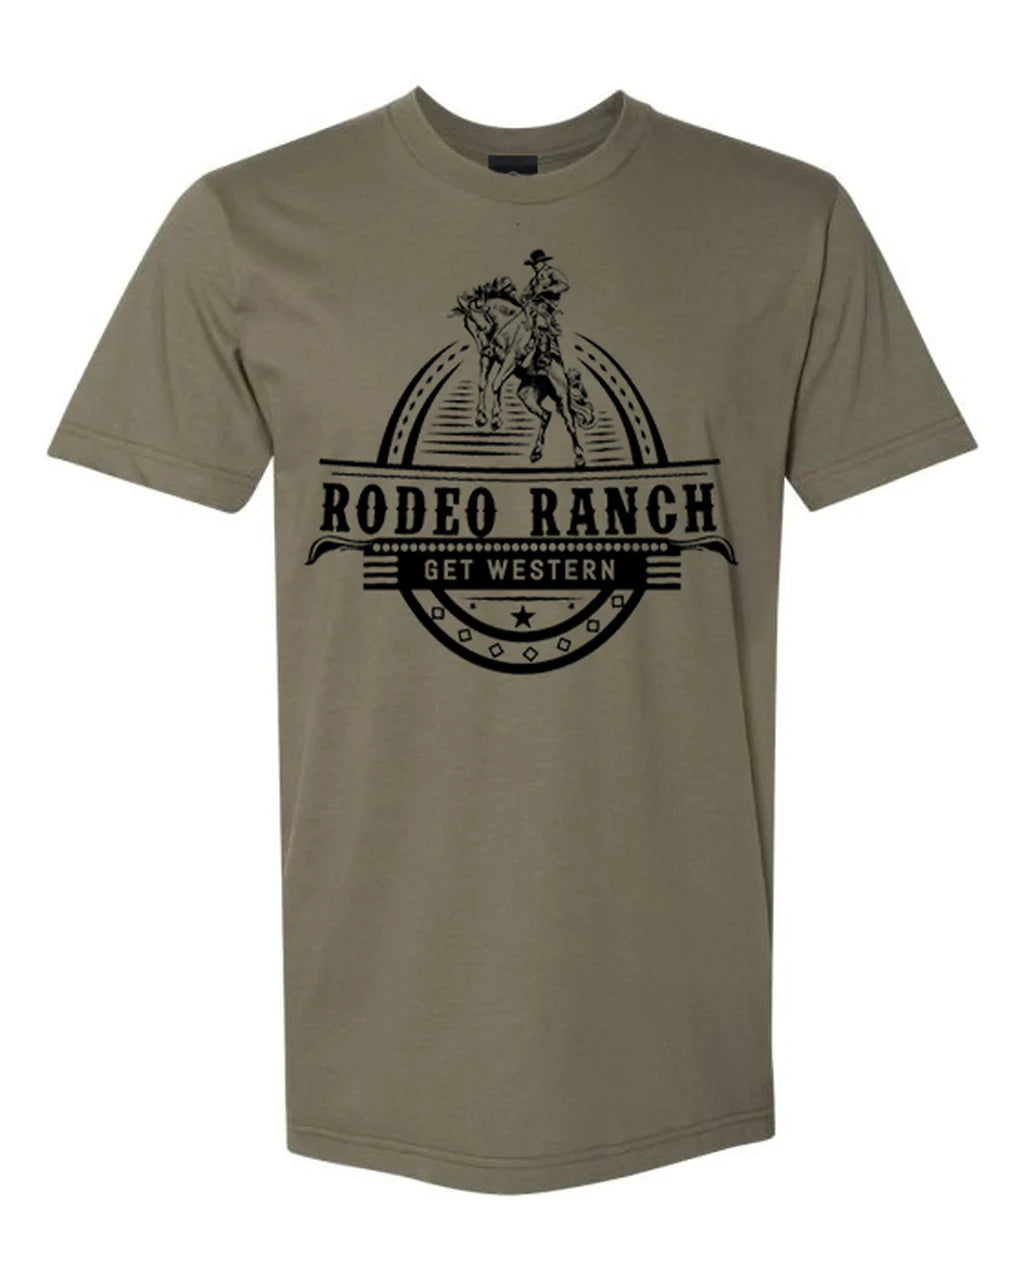 Rodeo Ranch Get Western Tee